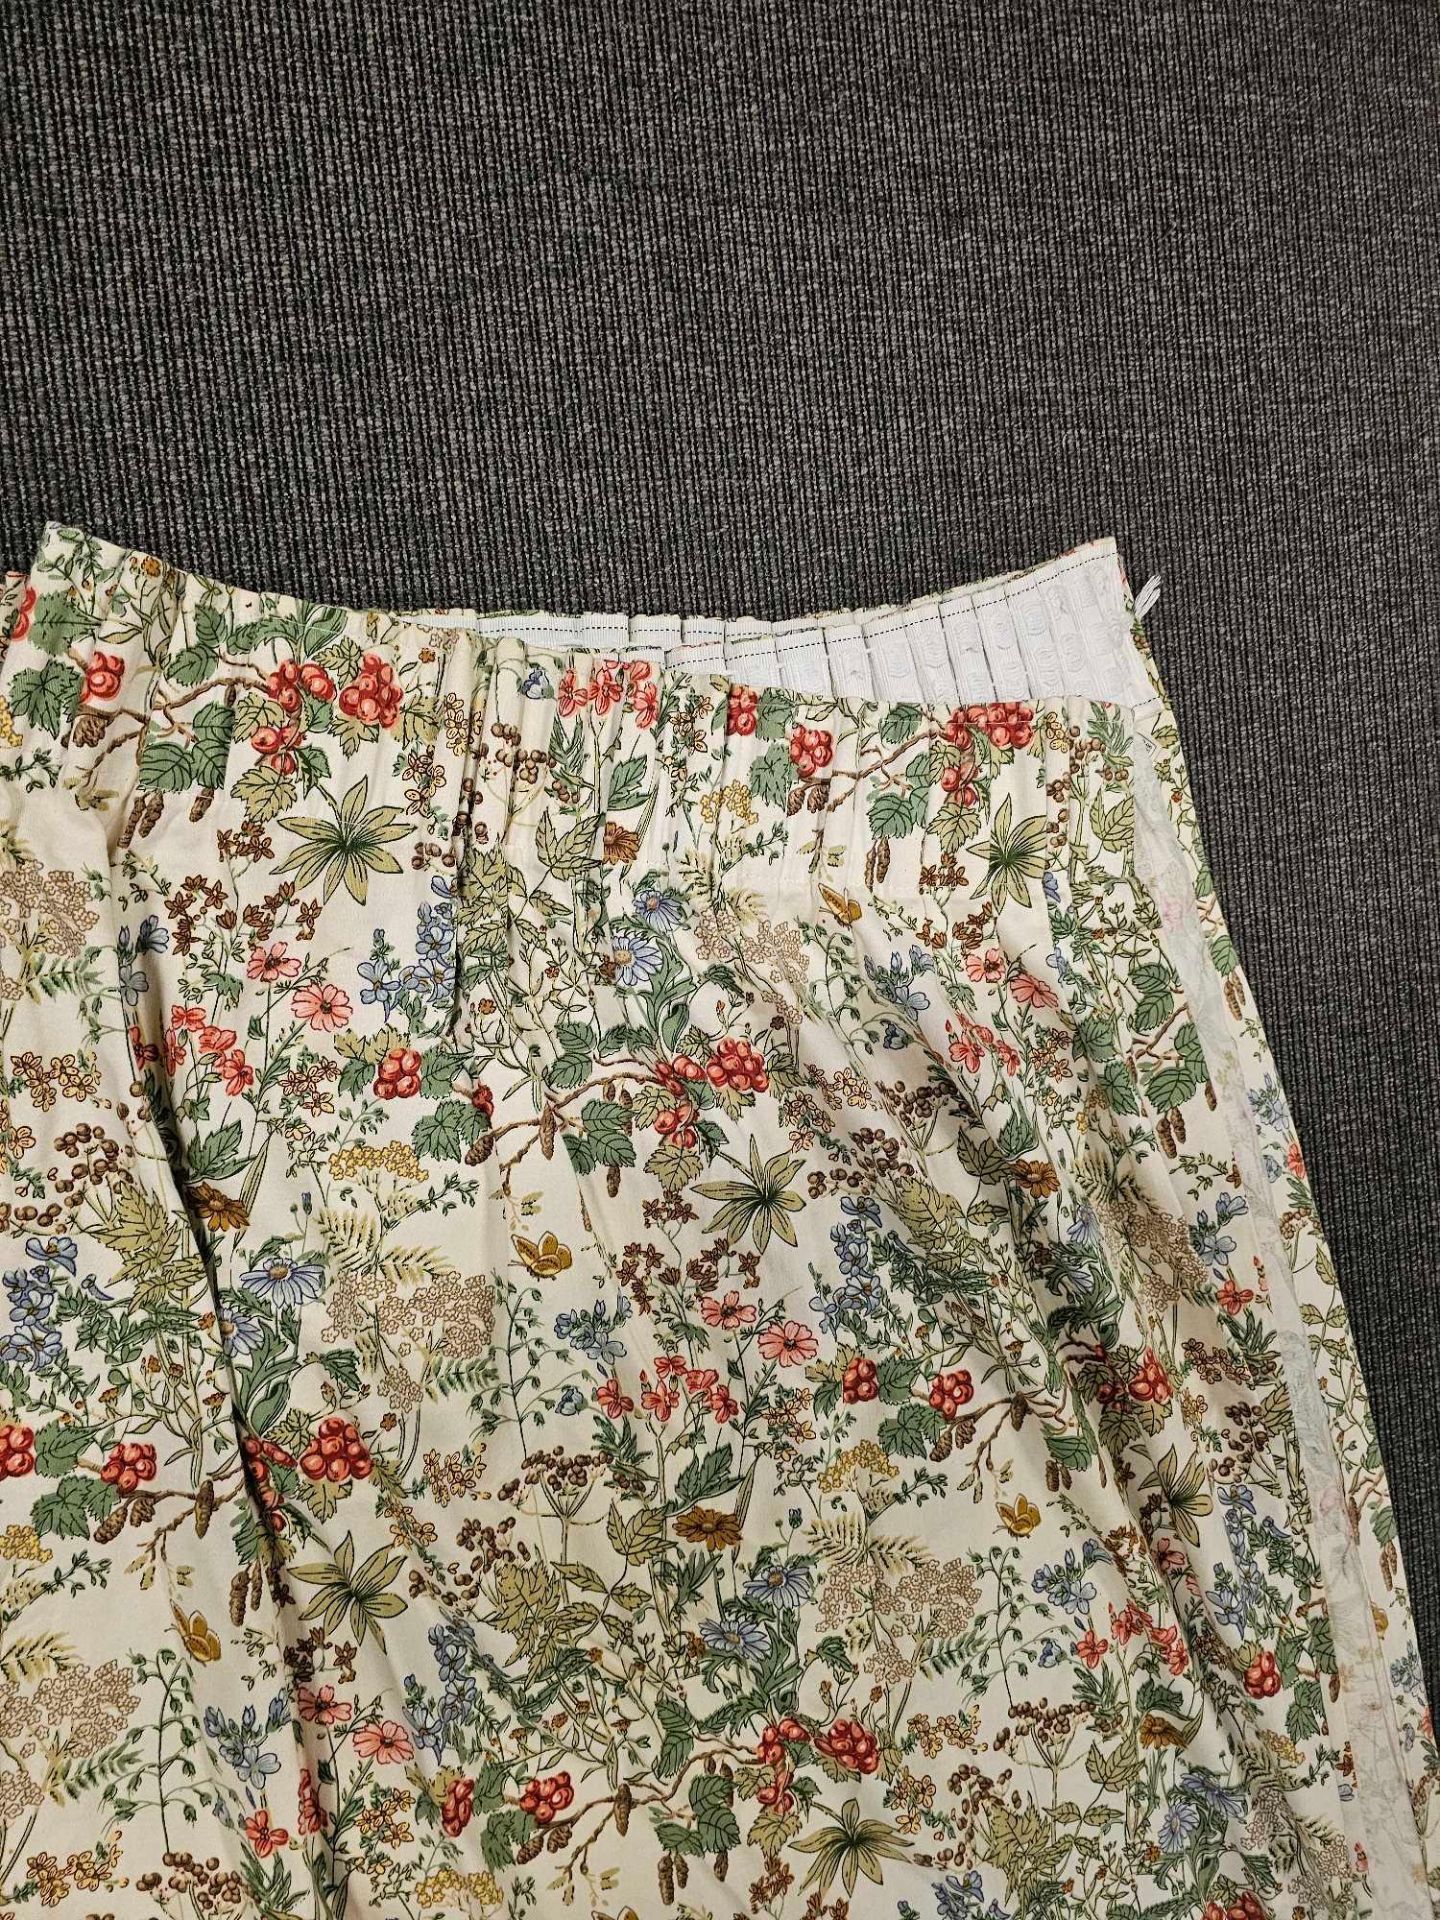 A Pair Of Cotton Flower Curtains Size -cm 174 x 170 Ref Dorch 76 - Image 2 of 3